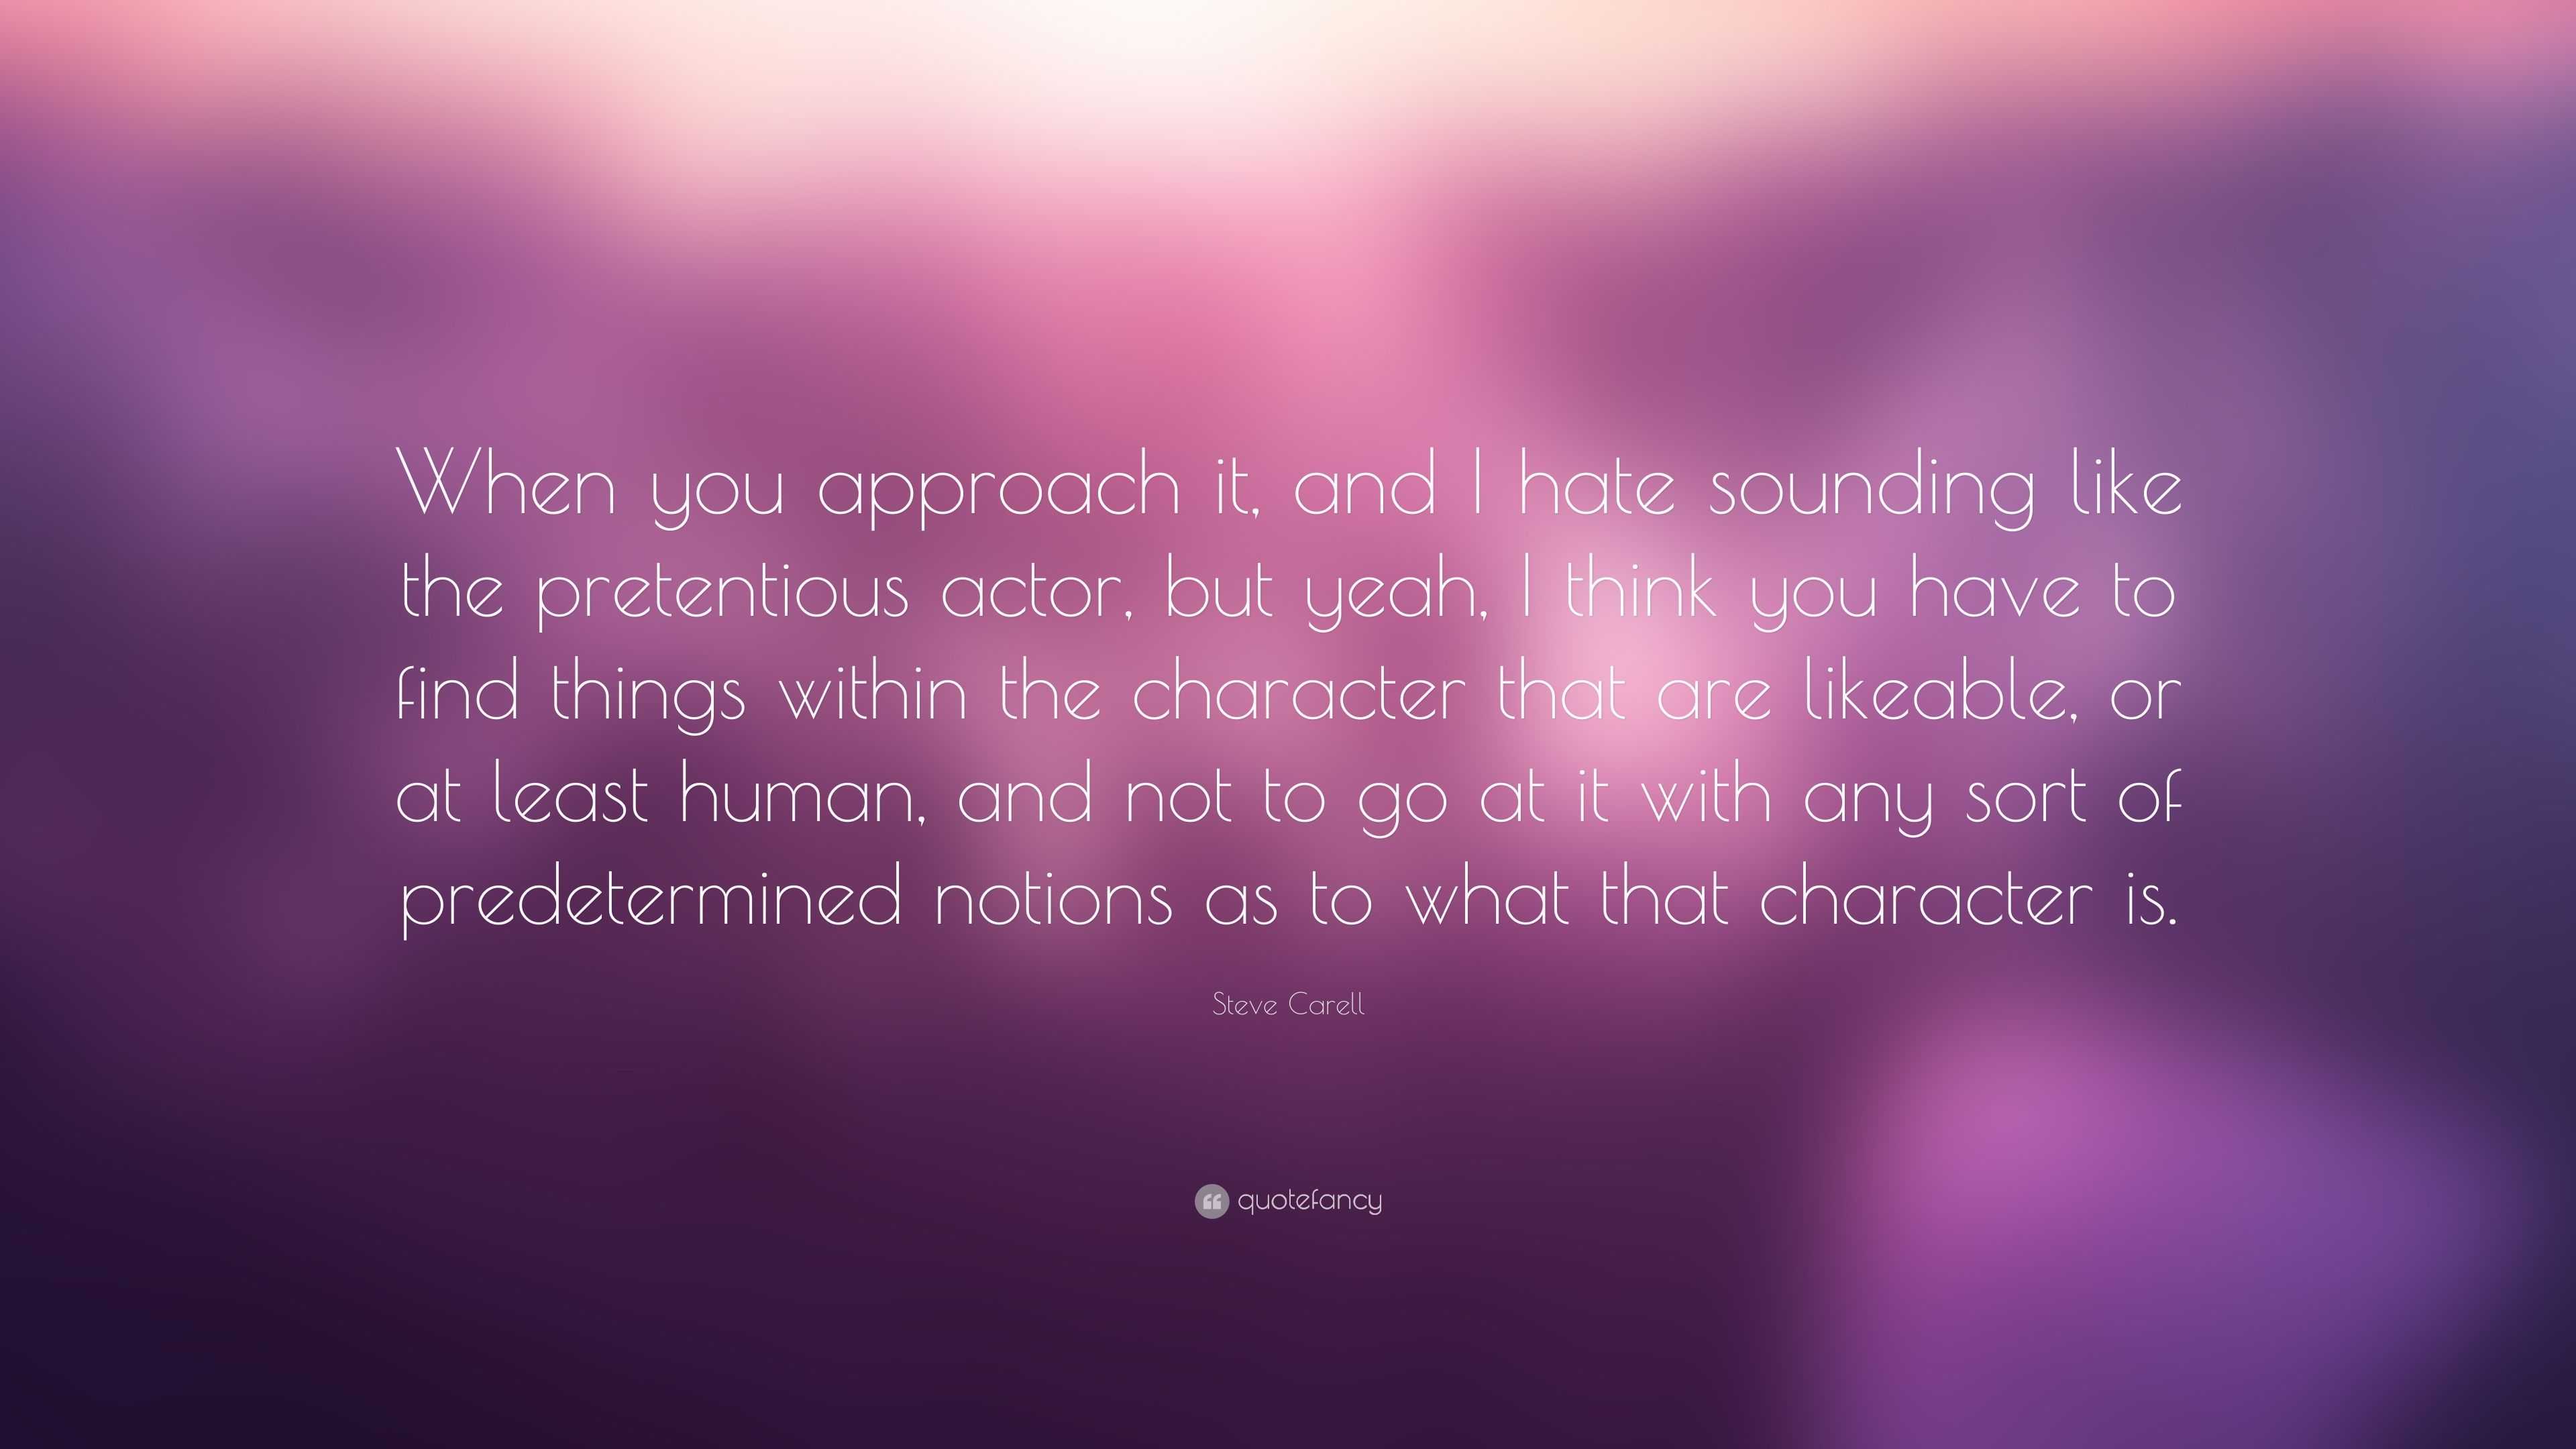 Steve Carell Quote: “When you approach it, and I hate sounding like the ...